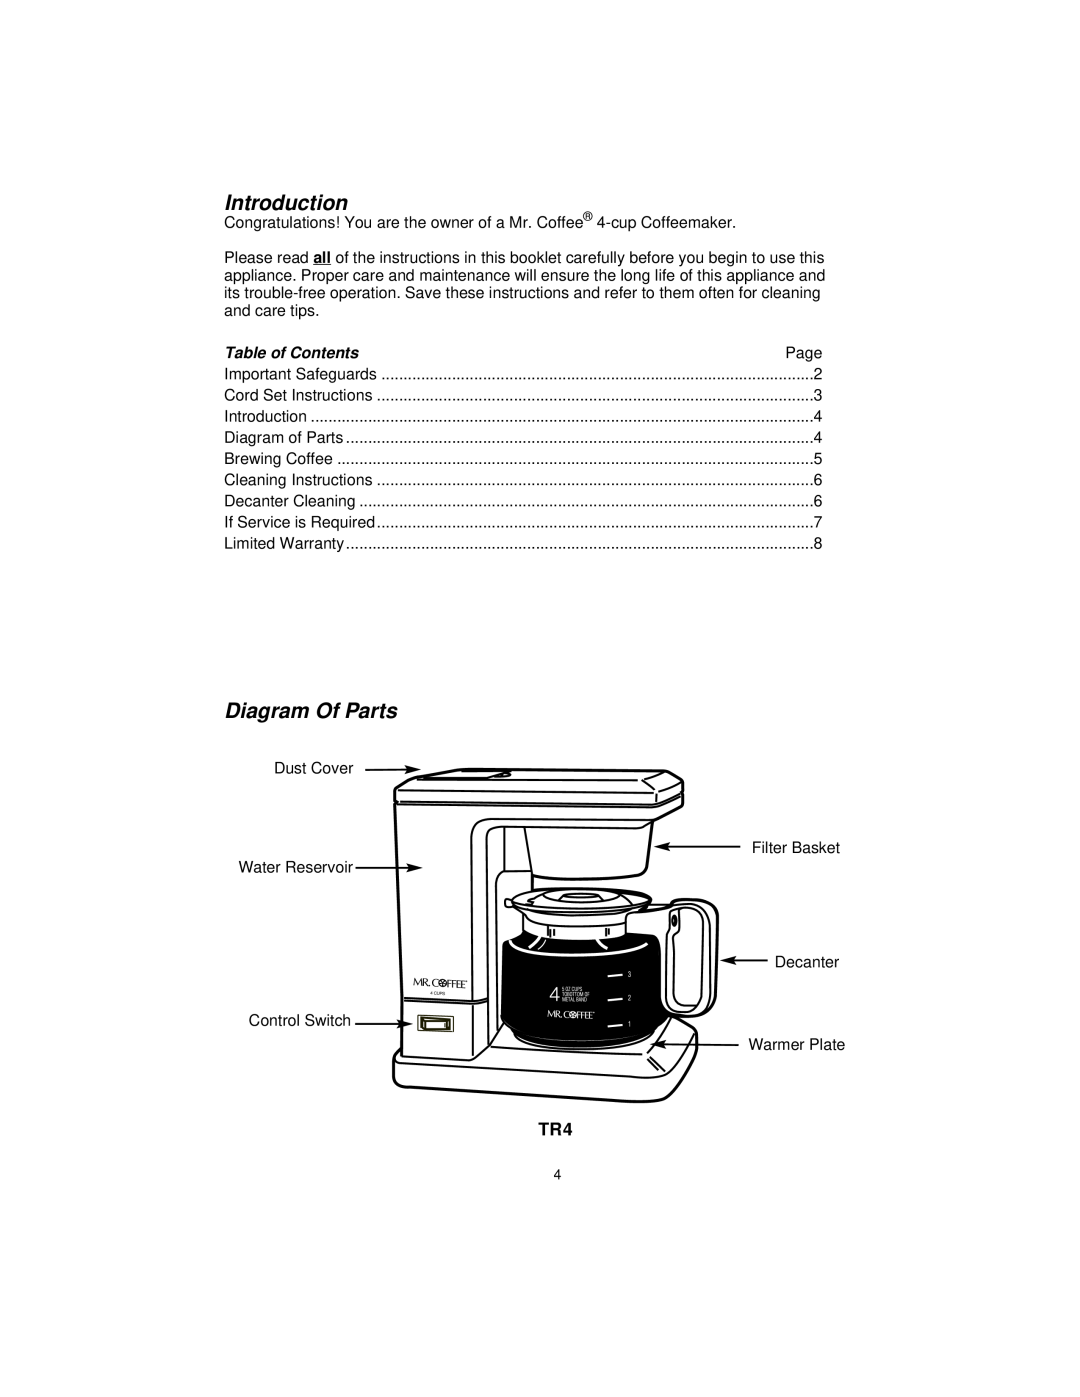 Mr. Coffee D40 manual Introduction, Diagram Of Parts, Table of Contents 